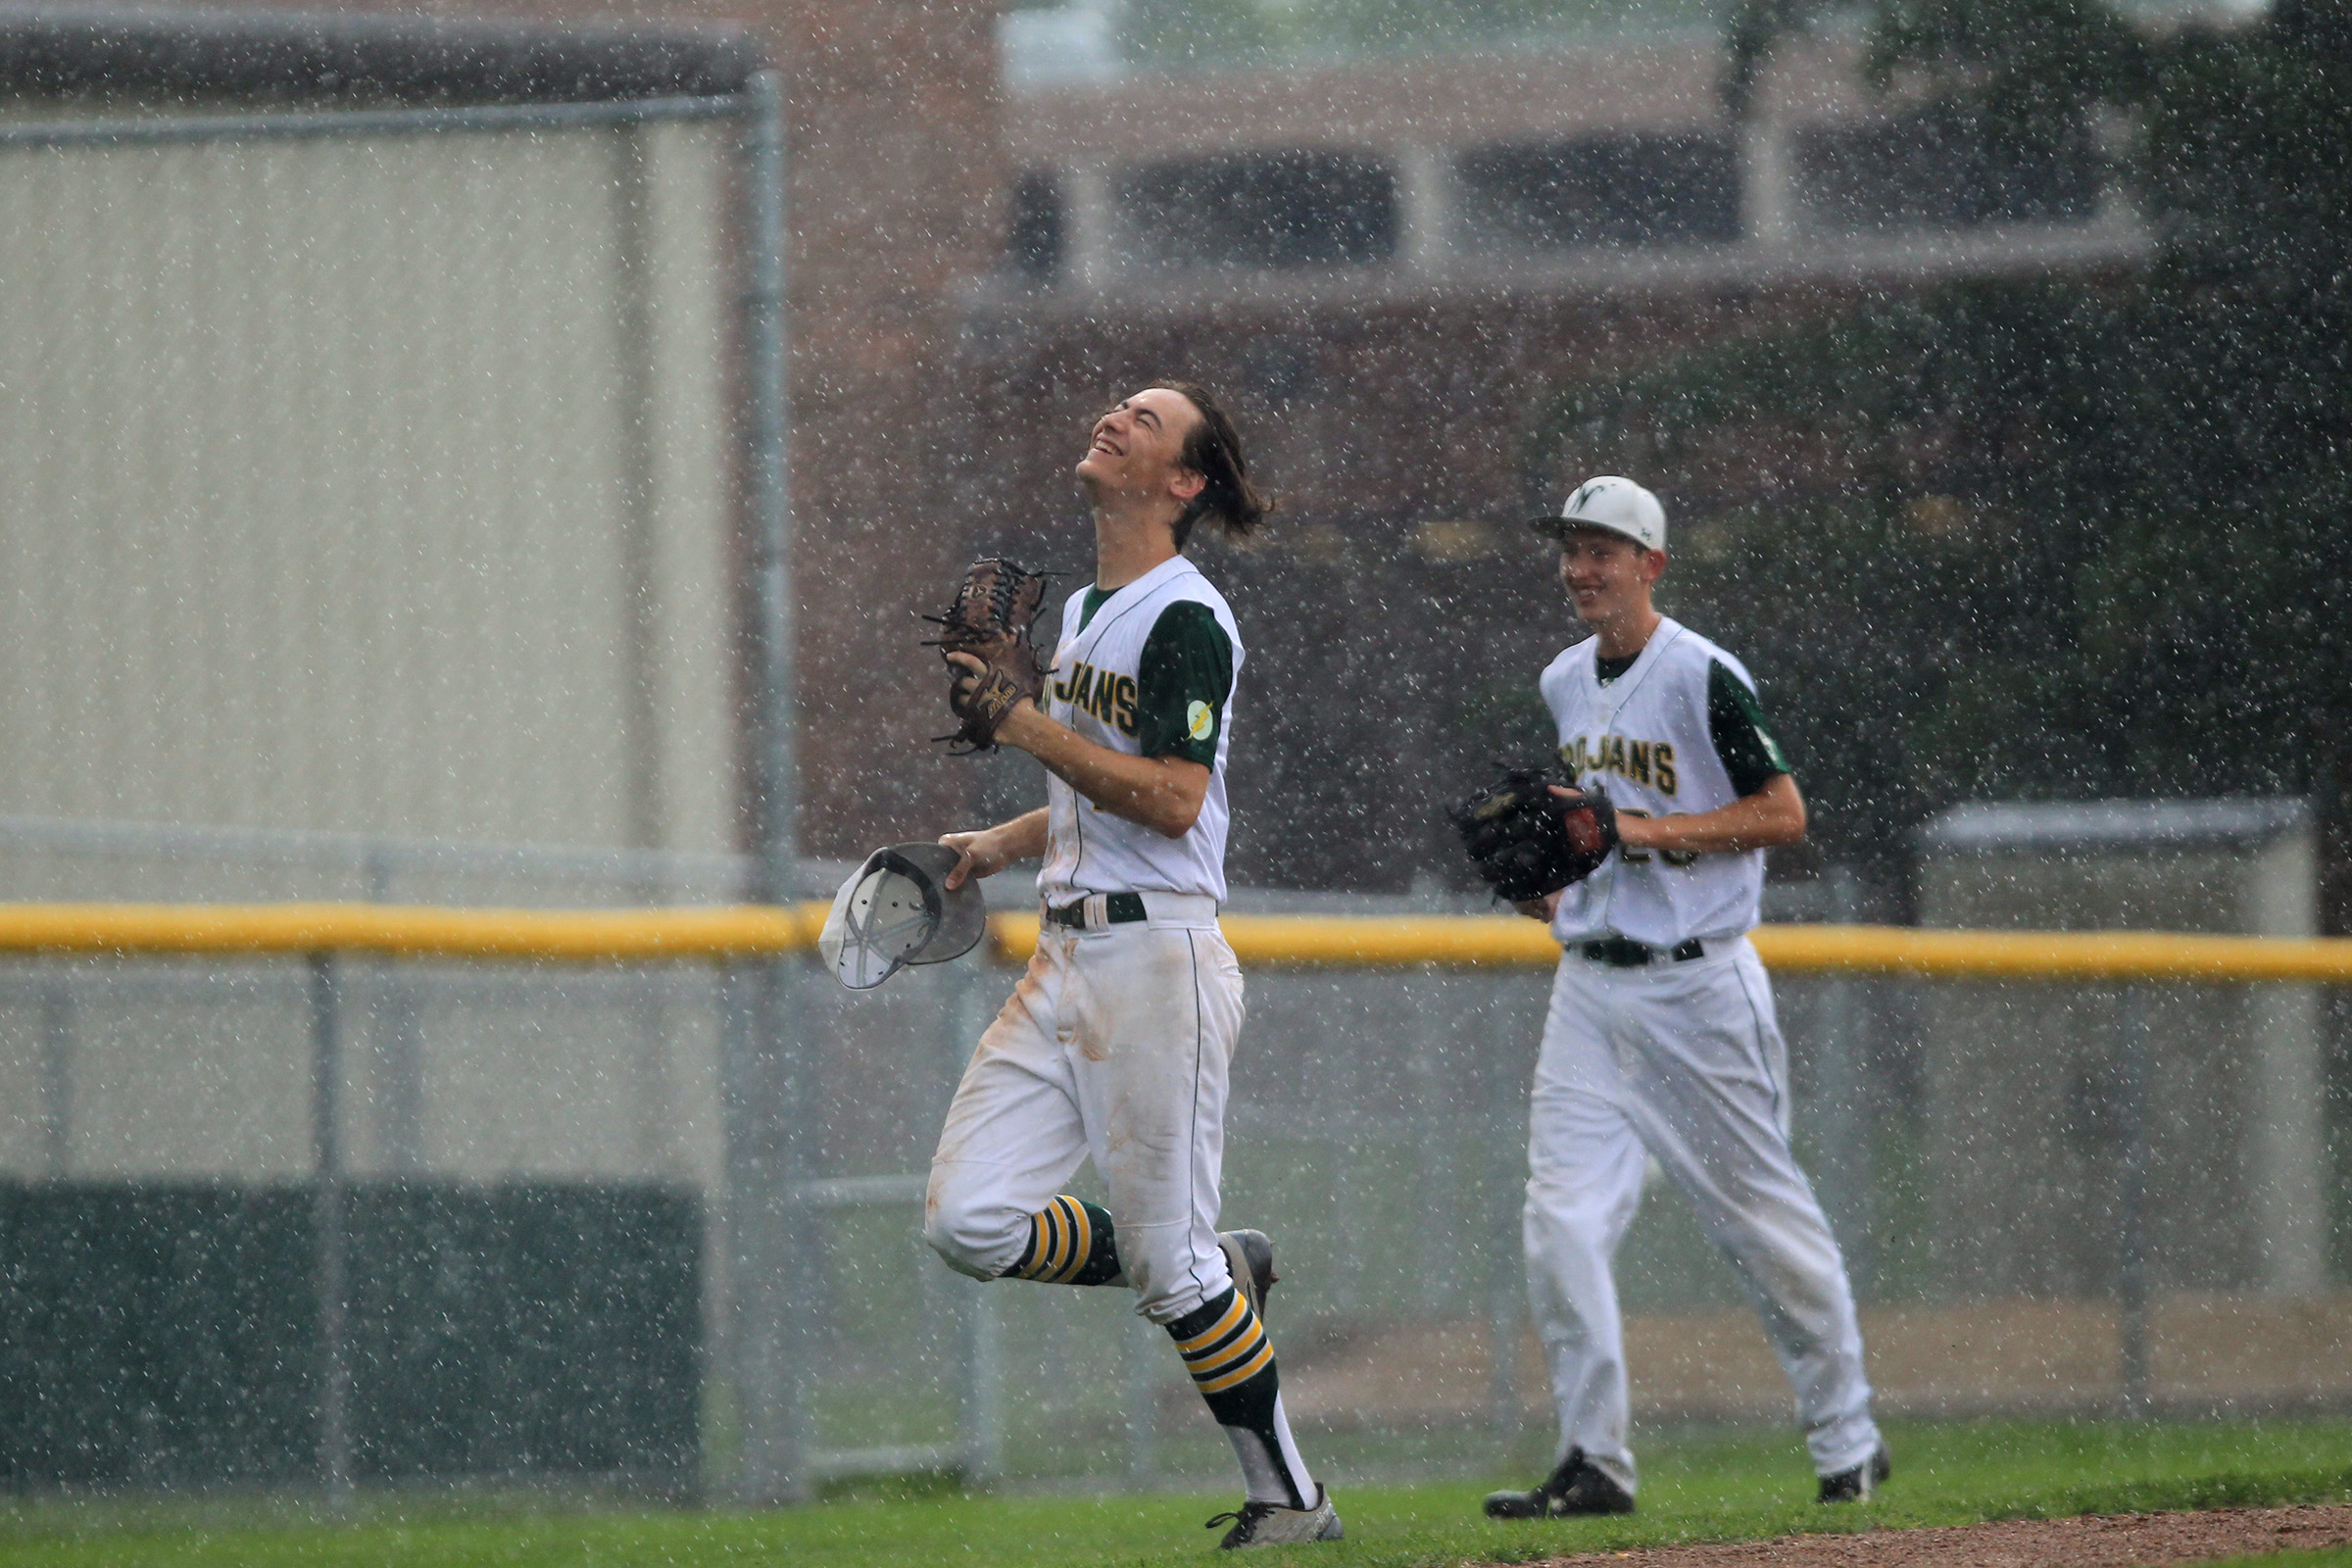  West High's Kevin DeLaney embraces the rain as the Trojans' game against Waterloo East gets postponed until another day. 